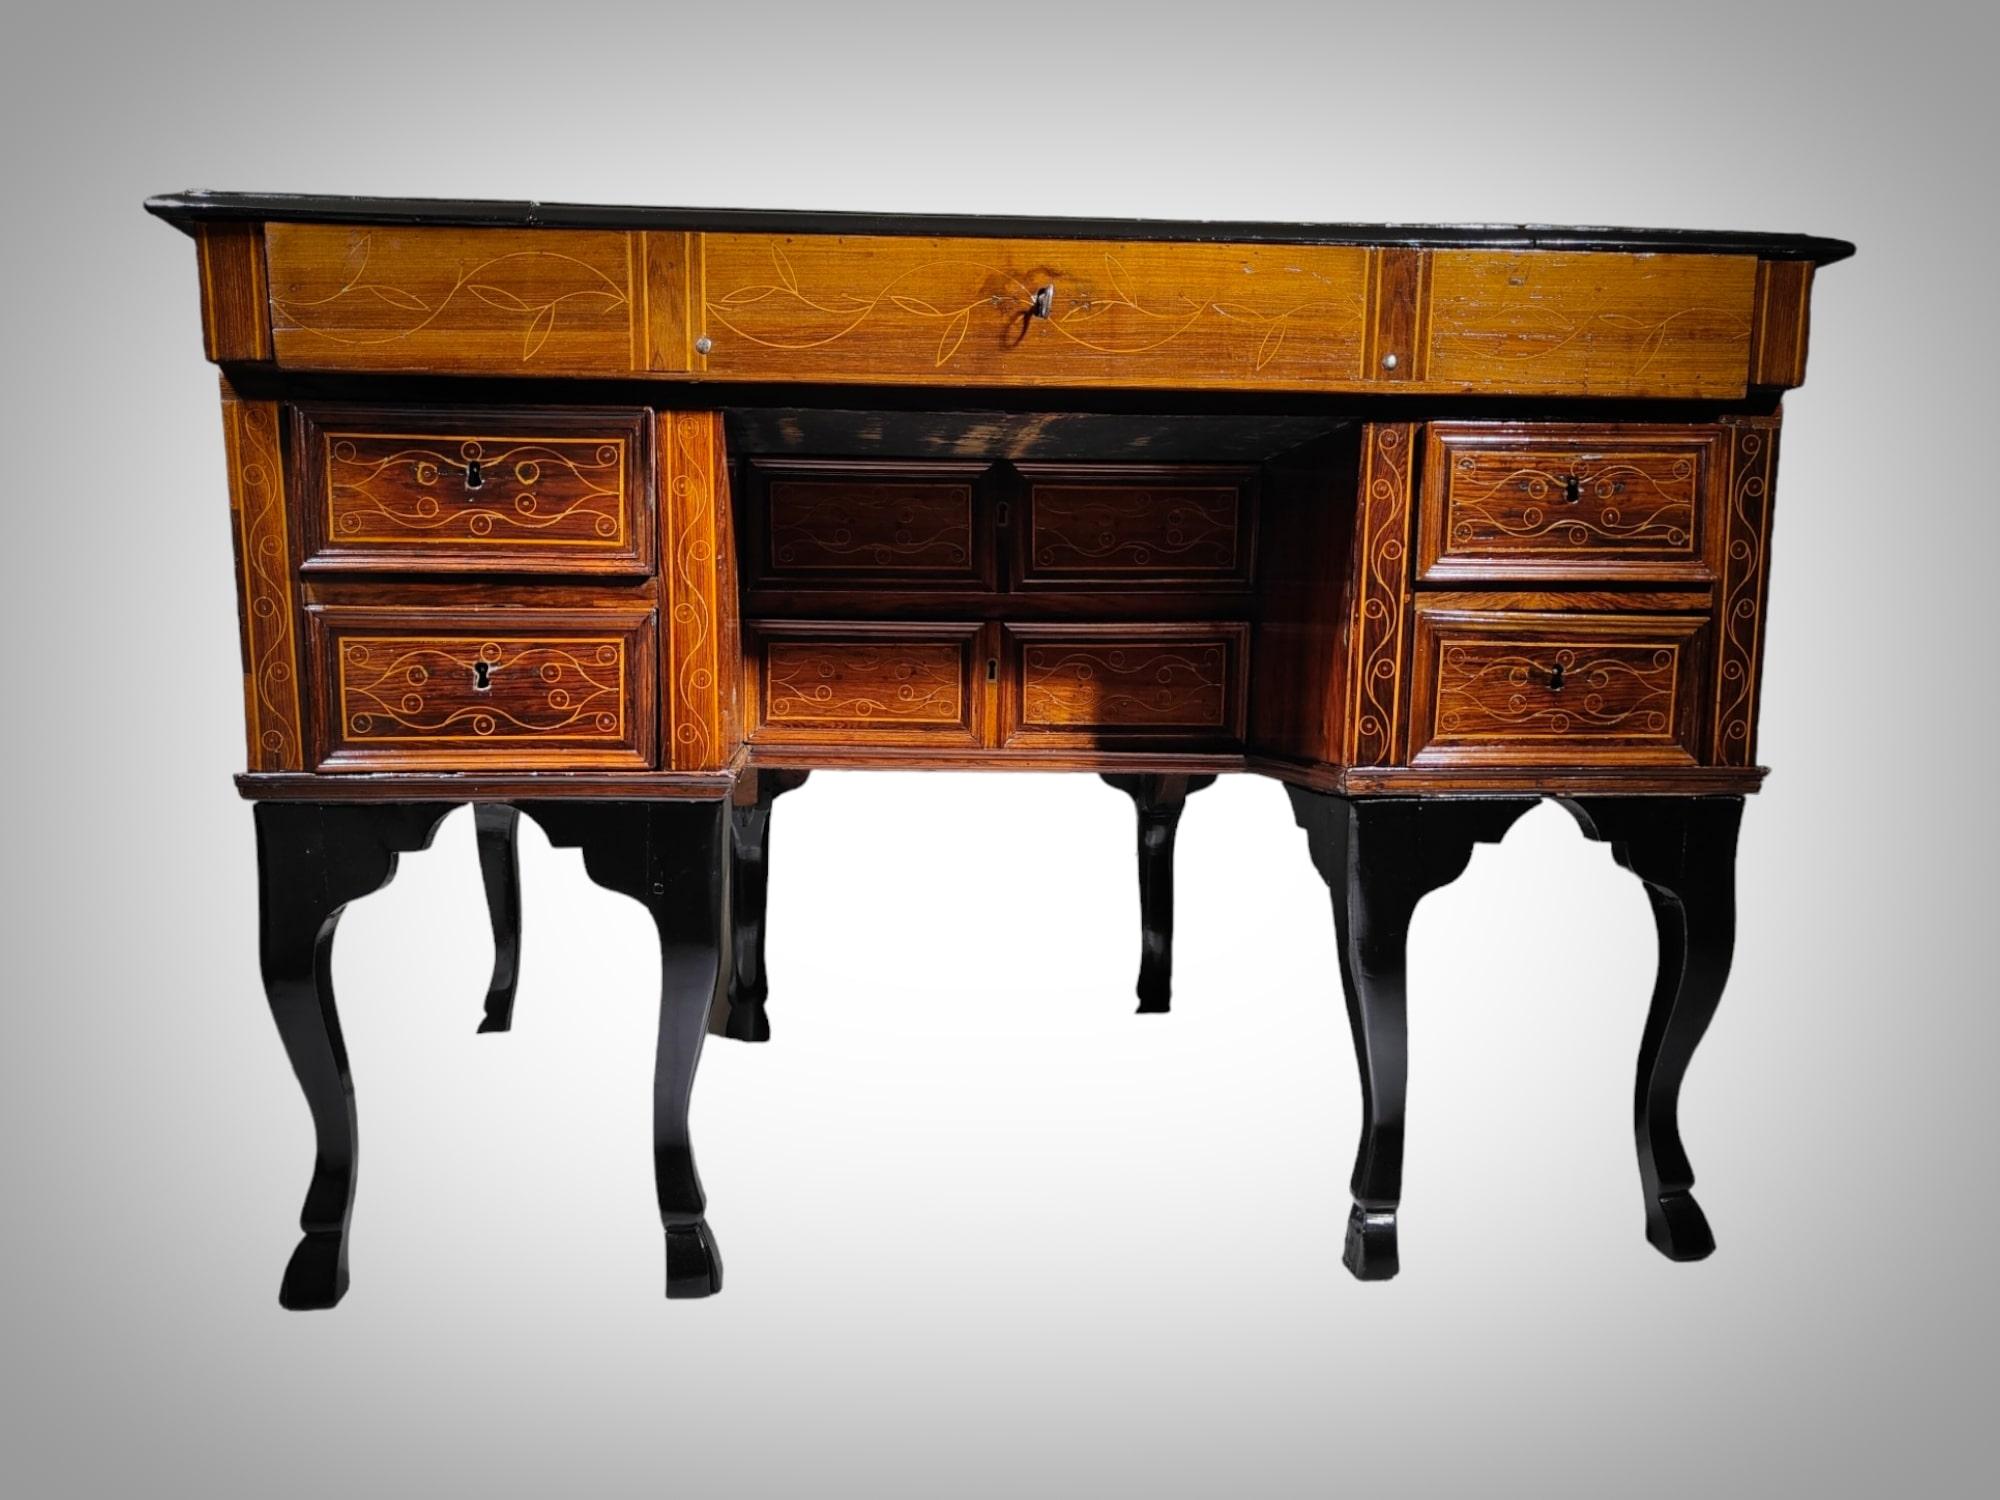 This exceptional Felipe V writing desk is a true masterpiece of cabinetmaking. It captivates with its graceful design and meticulous craftsmanship. The piece, with a hinged cover and front, has been fashioned from the rich and warm woods of walnut